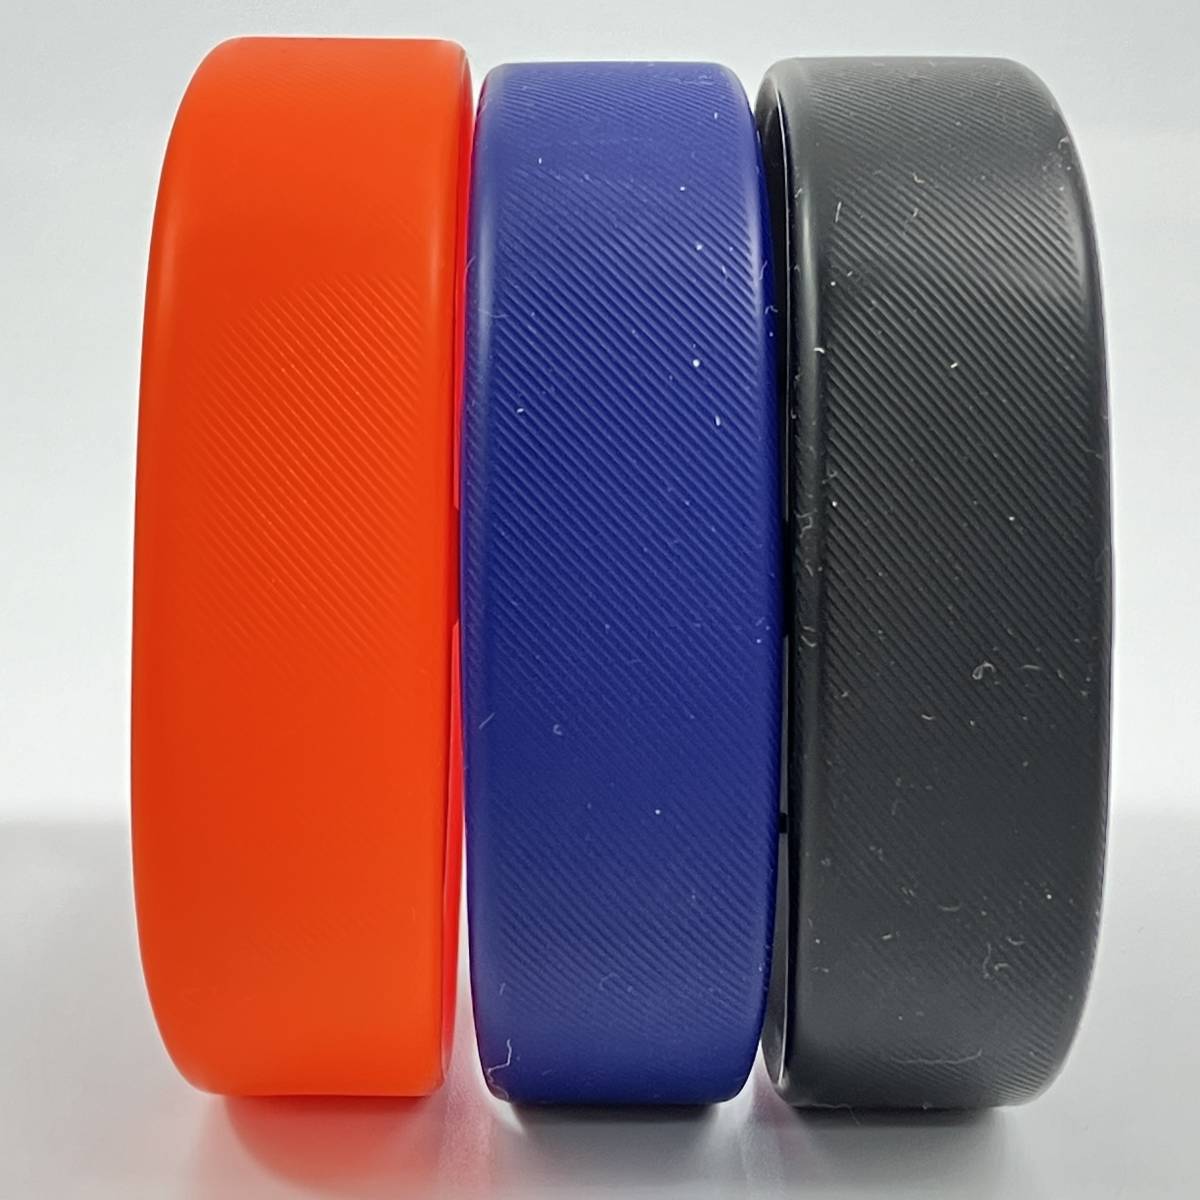 SONY Sony SmartBand for Smart band for for exchange band belt 5 piece! free shipping!